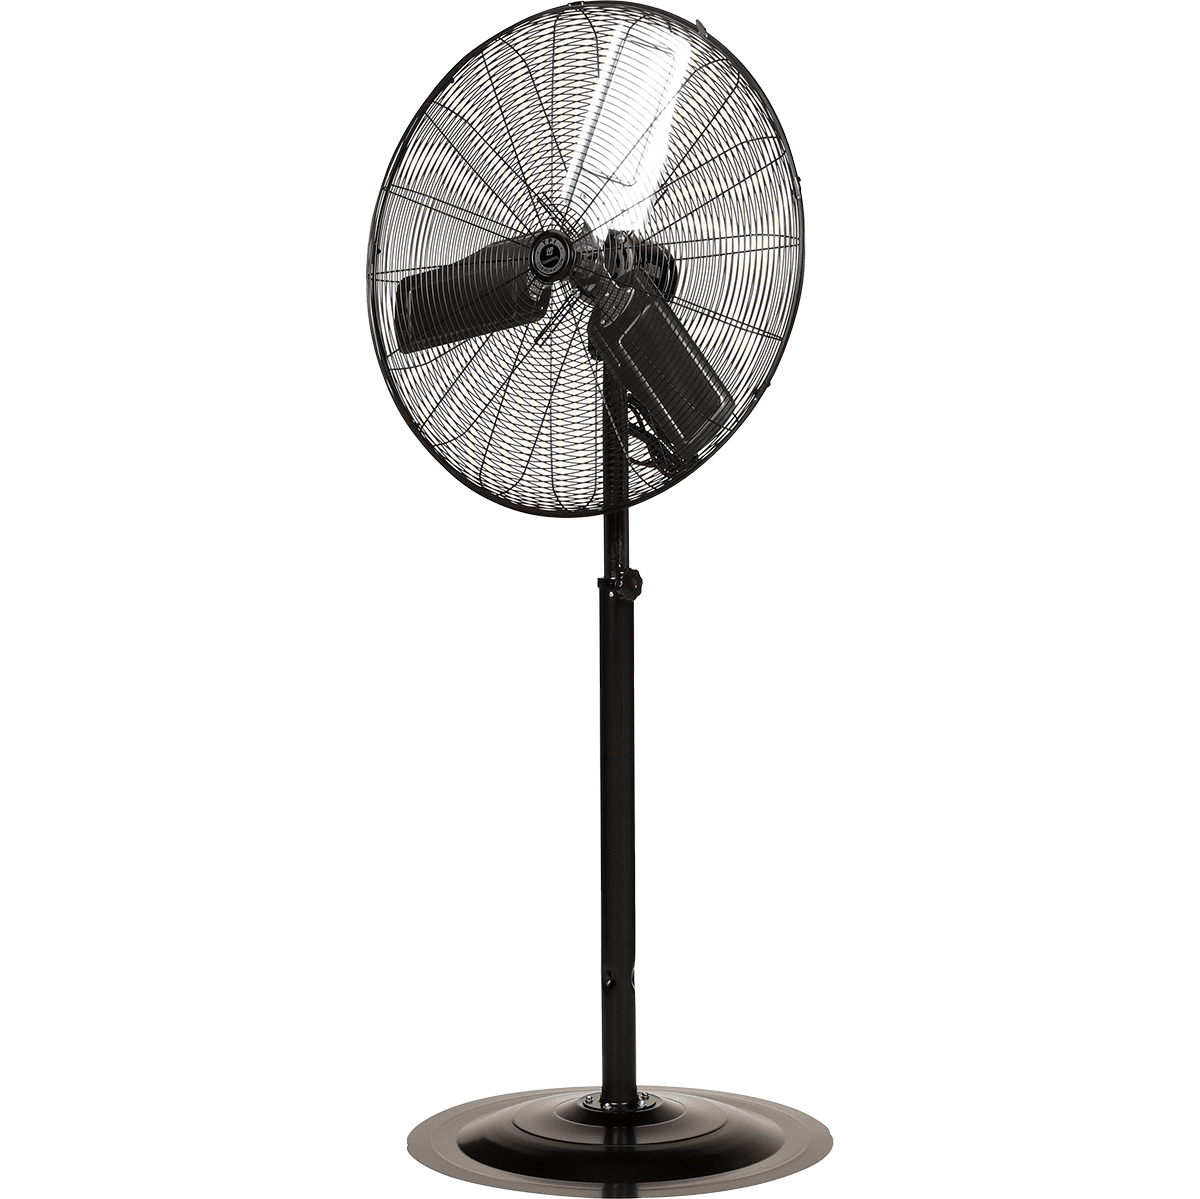 TPI CACU 3-Speed 1/4 HP Fixed Commercial Fan - 30-in. Pedestal Mount